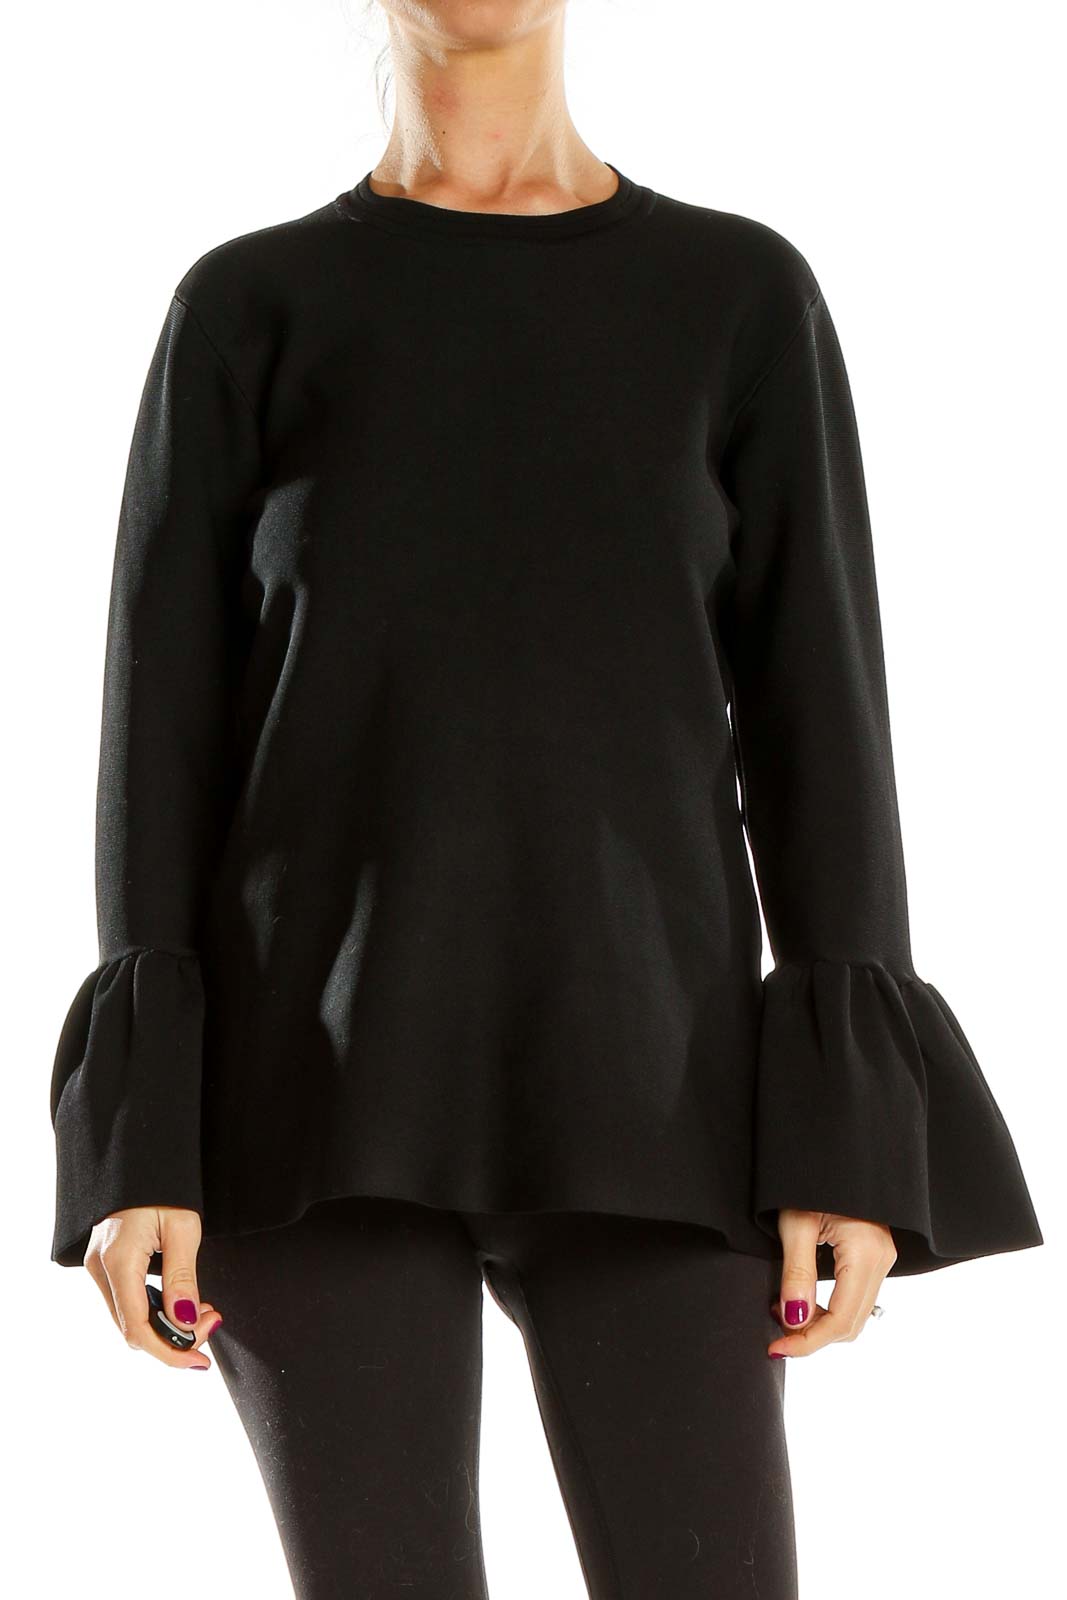 Black Structured Puff Sleeve Chic Top Front